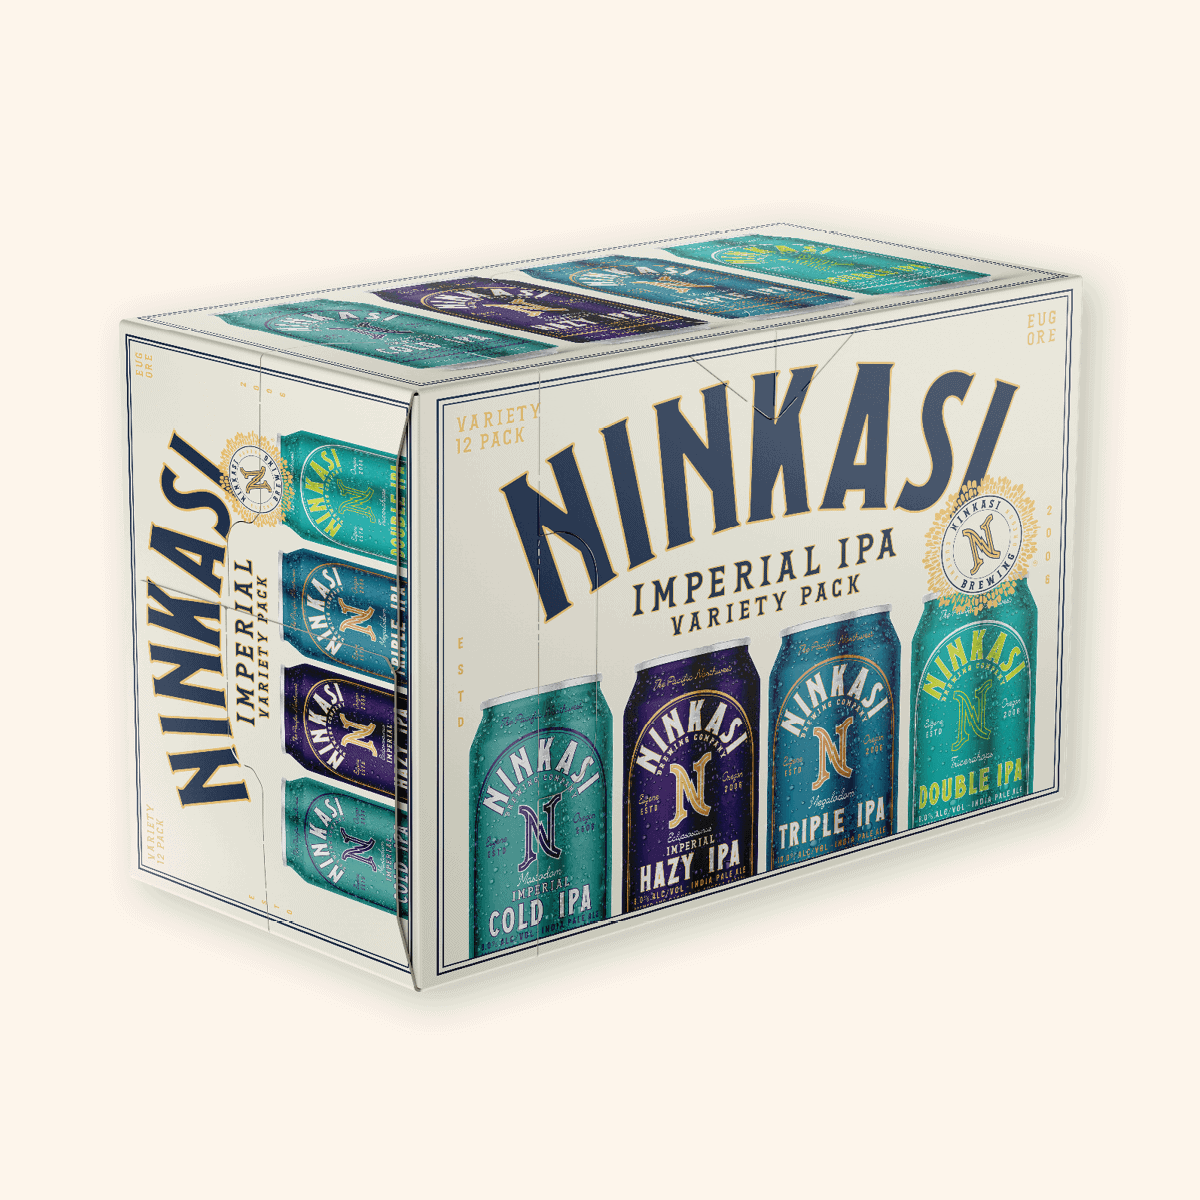 A 12-pack box of Ninkasi Imperial IPA Variety Pack. It shows three types of India Pale Ales: Total Domination IPA, Tricerahops Double IPA, and Maiden the Shade Summer IPA. The packaging is white with prominent blue and gold accents, featuring large Ninkasi branding and the brewery's crest. The words "COLD.," "HAZY.," and "TRIPLE IPA" suggest the different characteristics of the beers inside. Brewed in Eugene, Oregon, this collection showcases a range of hop-centric craft beers.